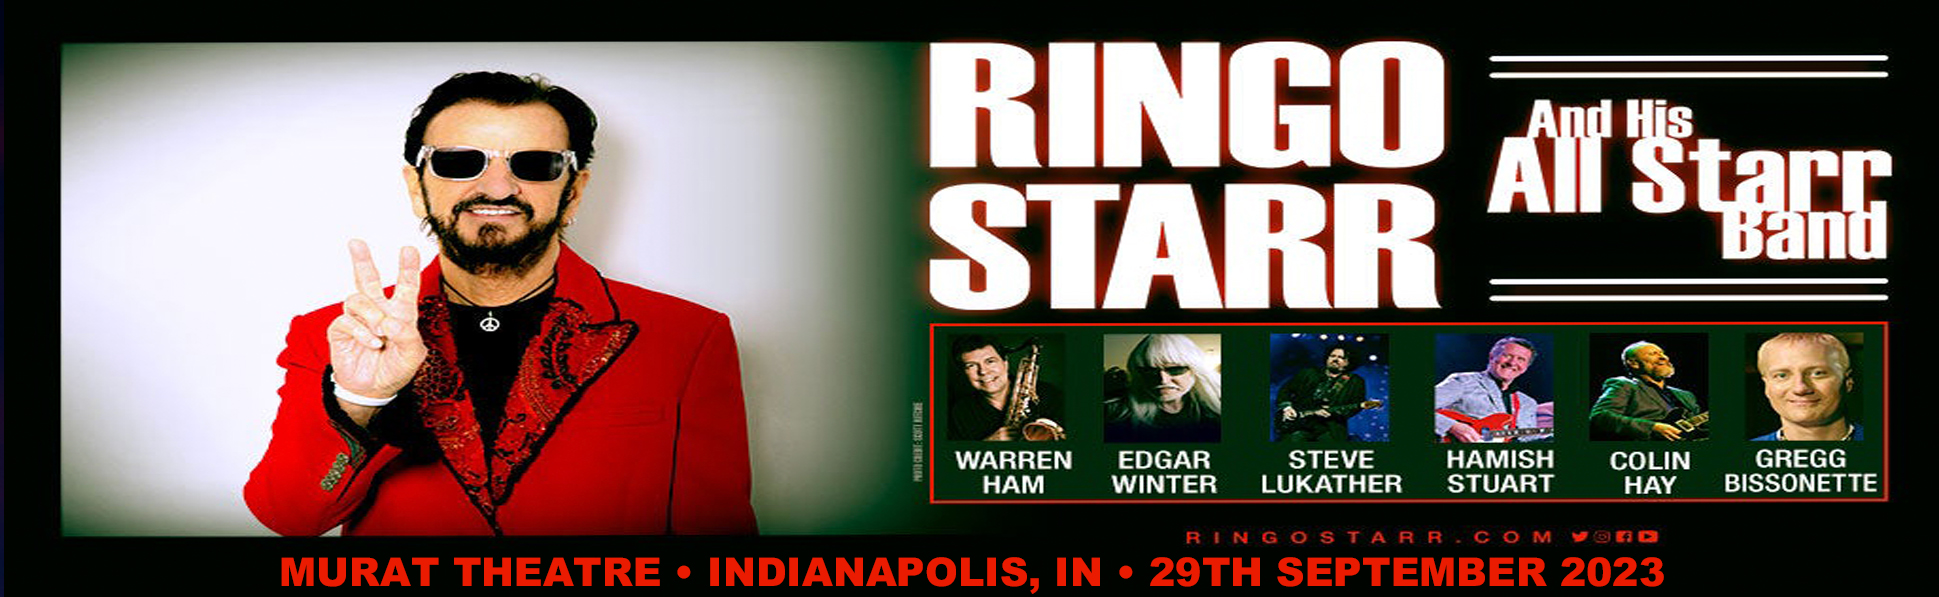 Ringo Starr and His All Starr Band at Murat Theatre